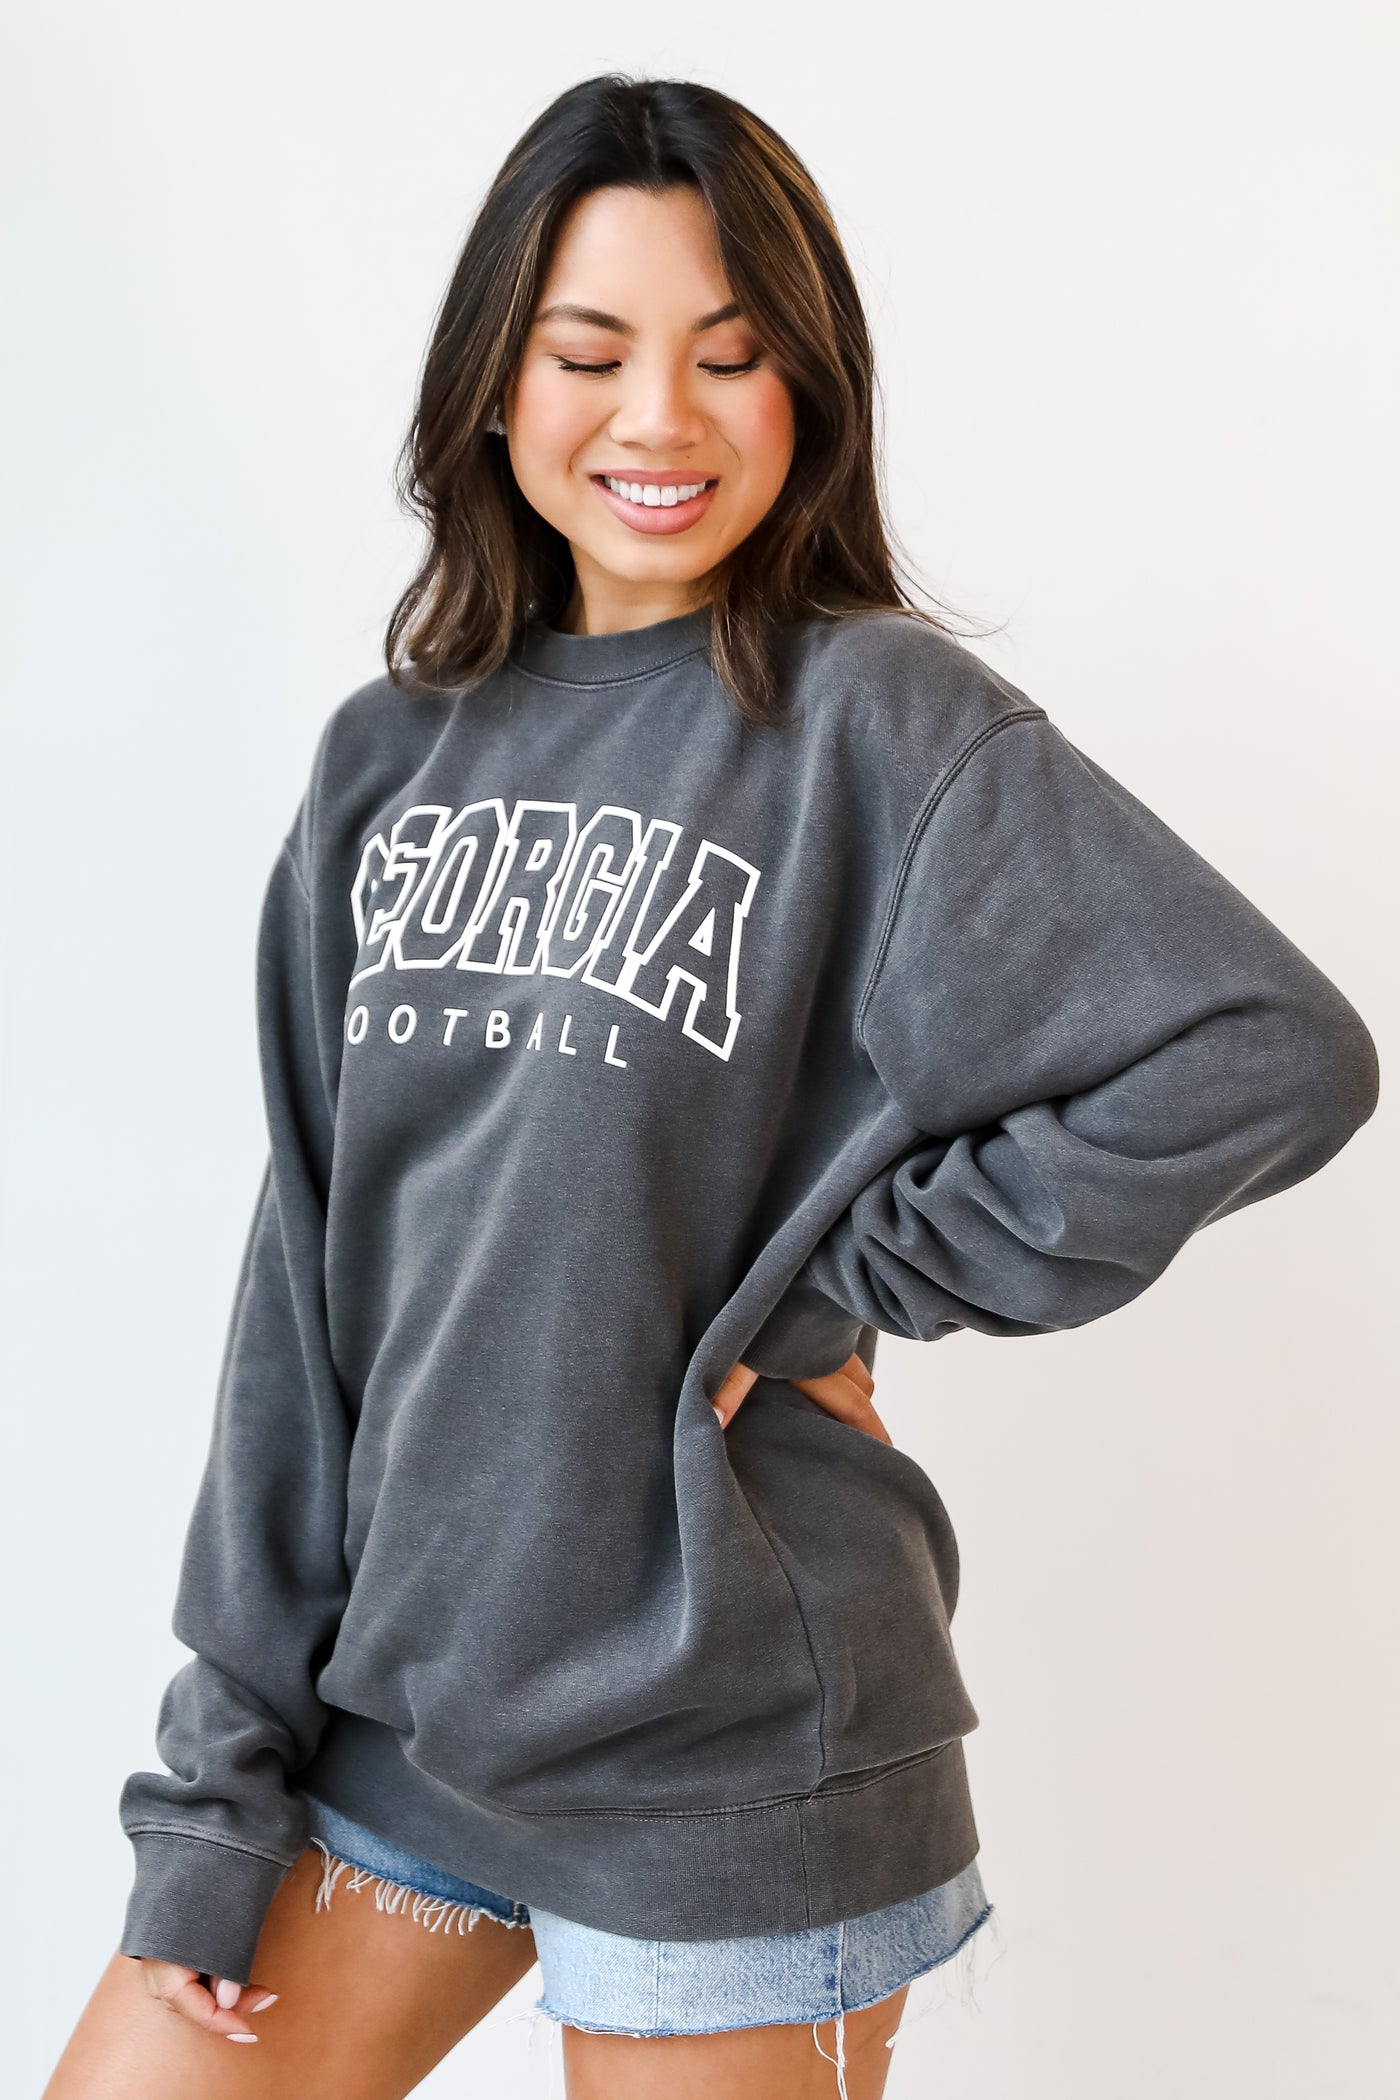 Black Georgia Football Block Letter Pullover side view